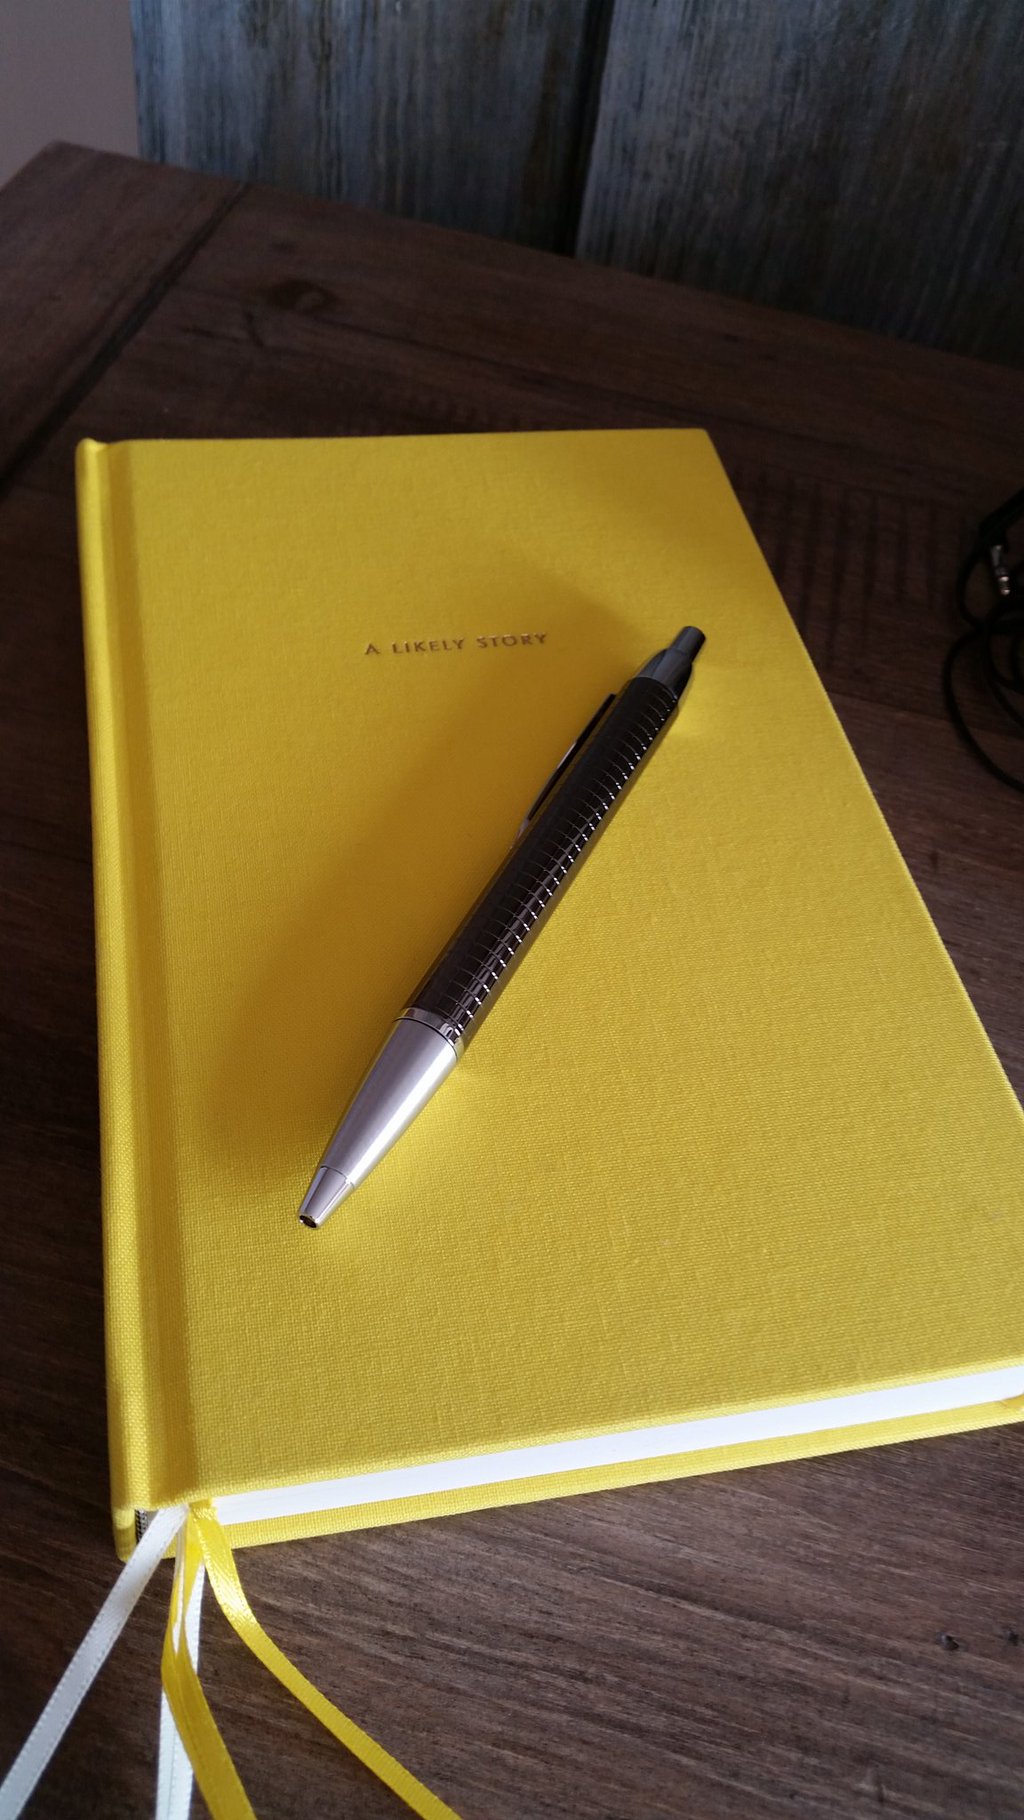 My shiny new notebook and pen